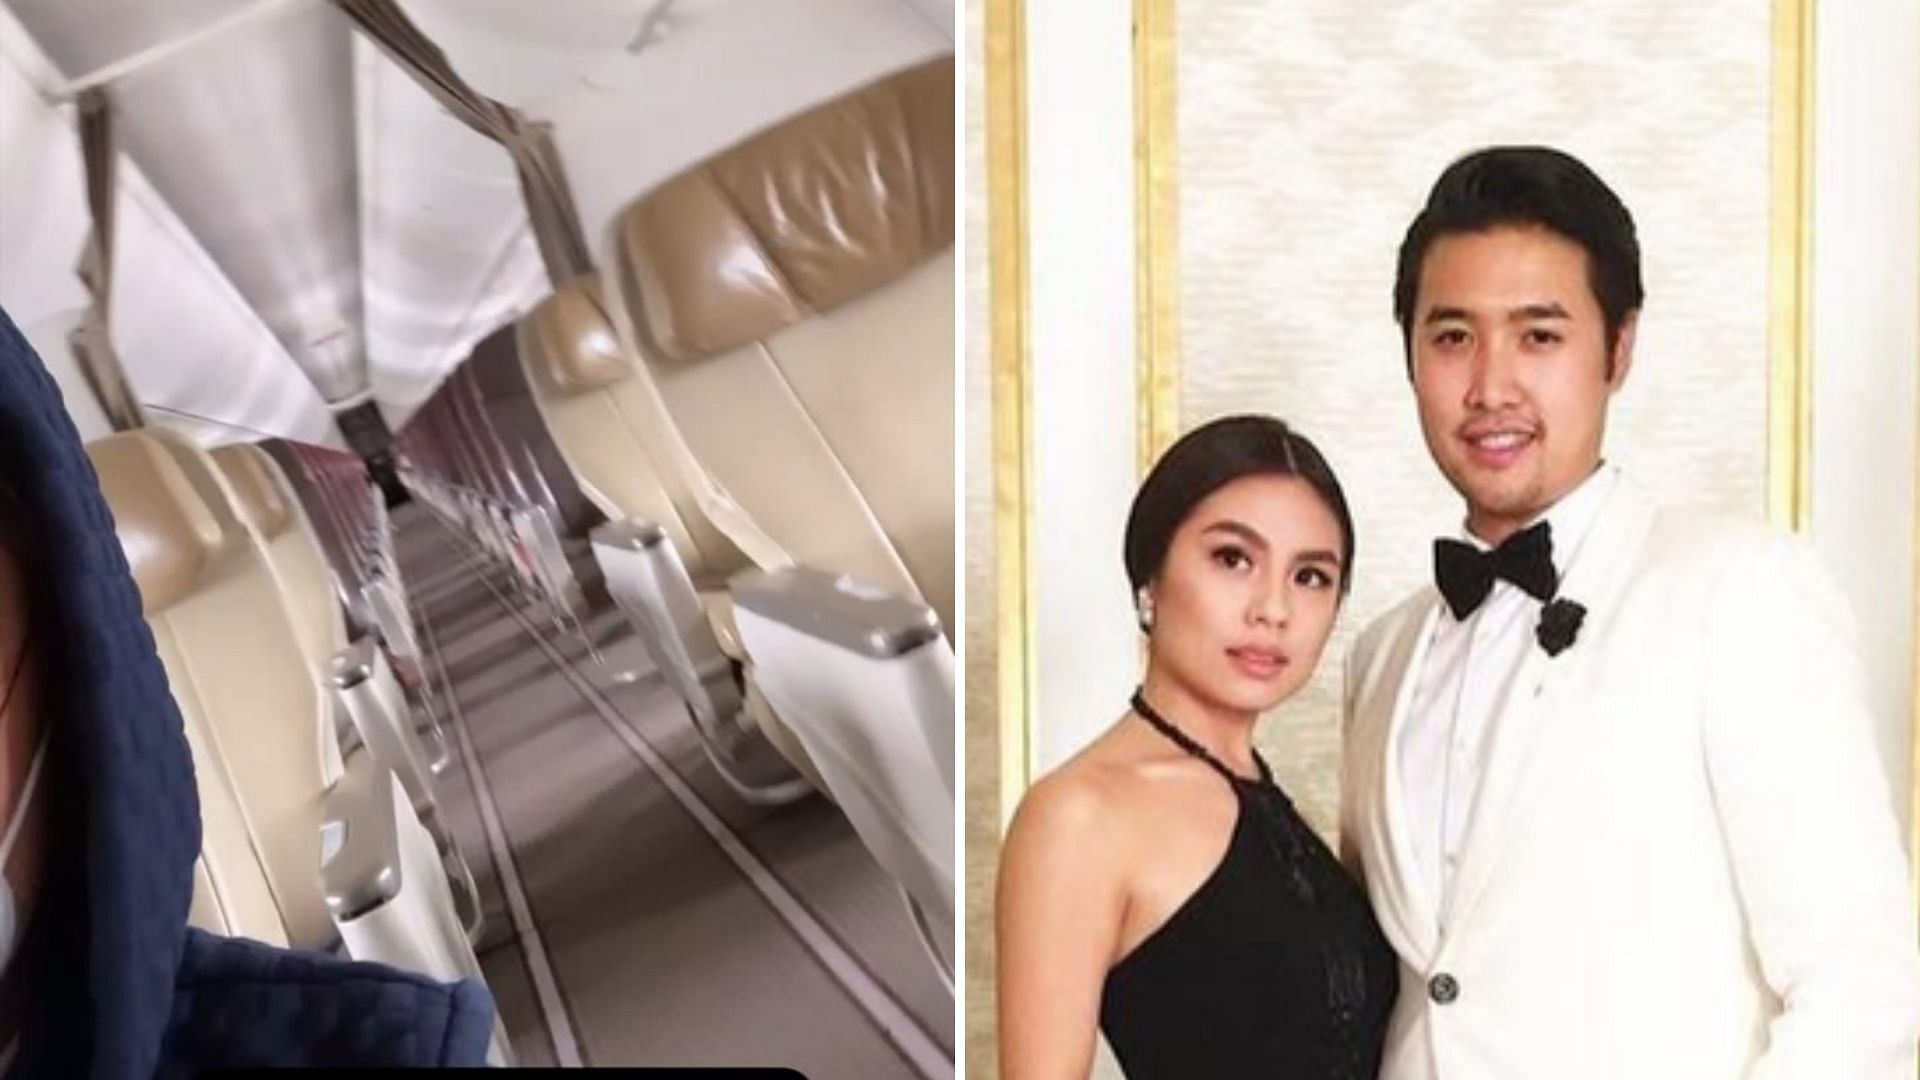 Indonesian Couple Books an Entire Flight to Avoid Getting COVID